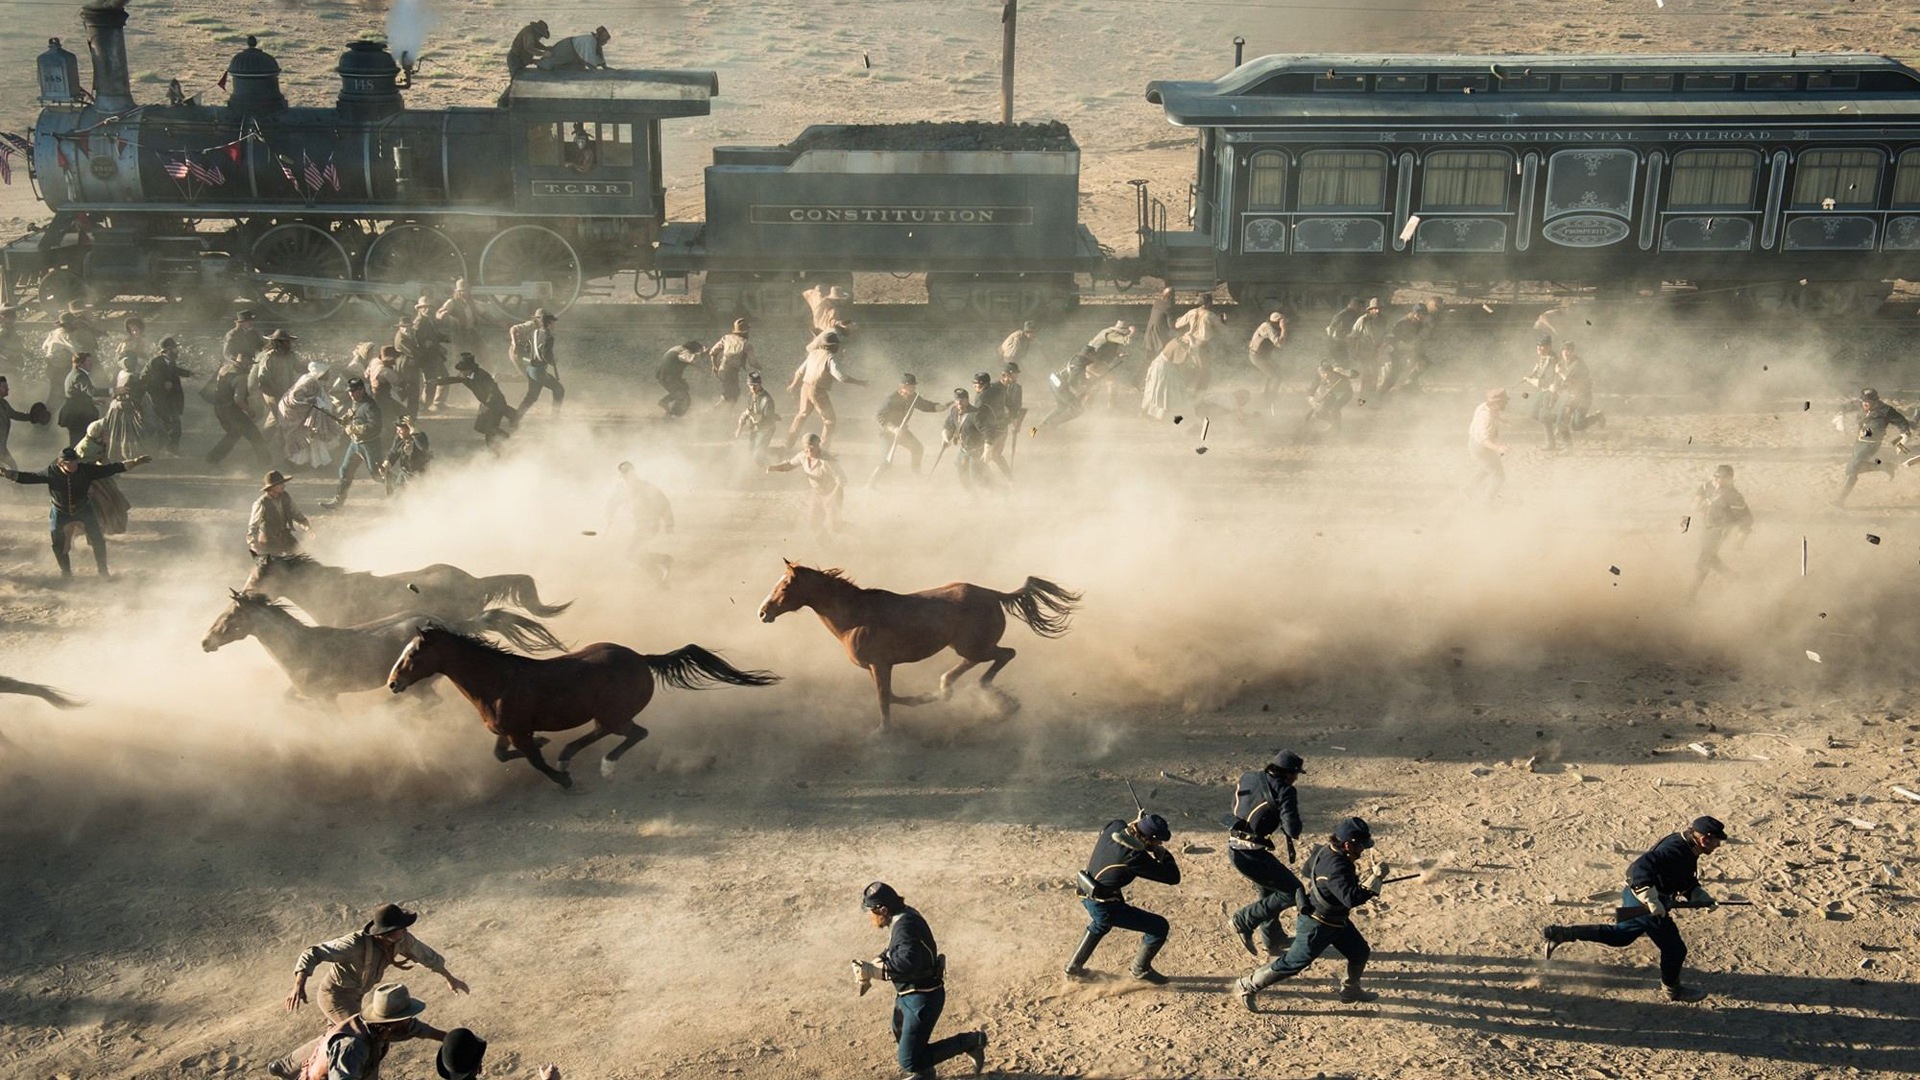 The Lone Ranger HD movie wallpapers #8 - 1920x1080